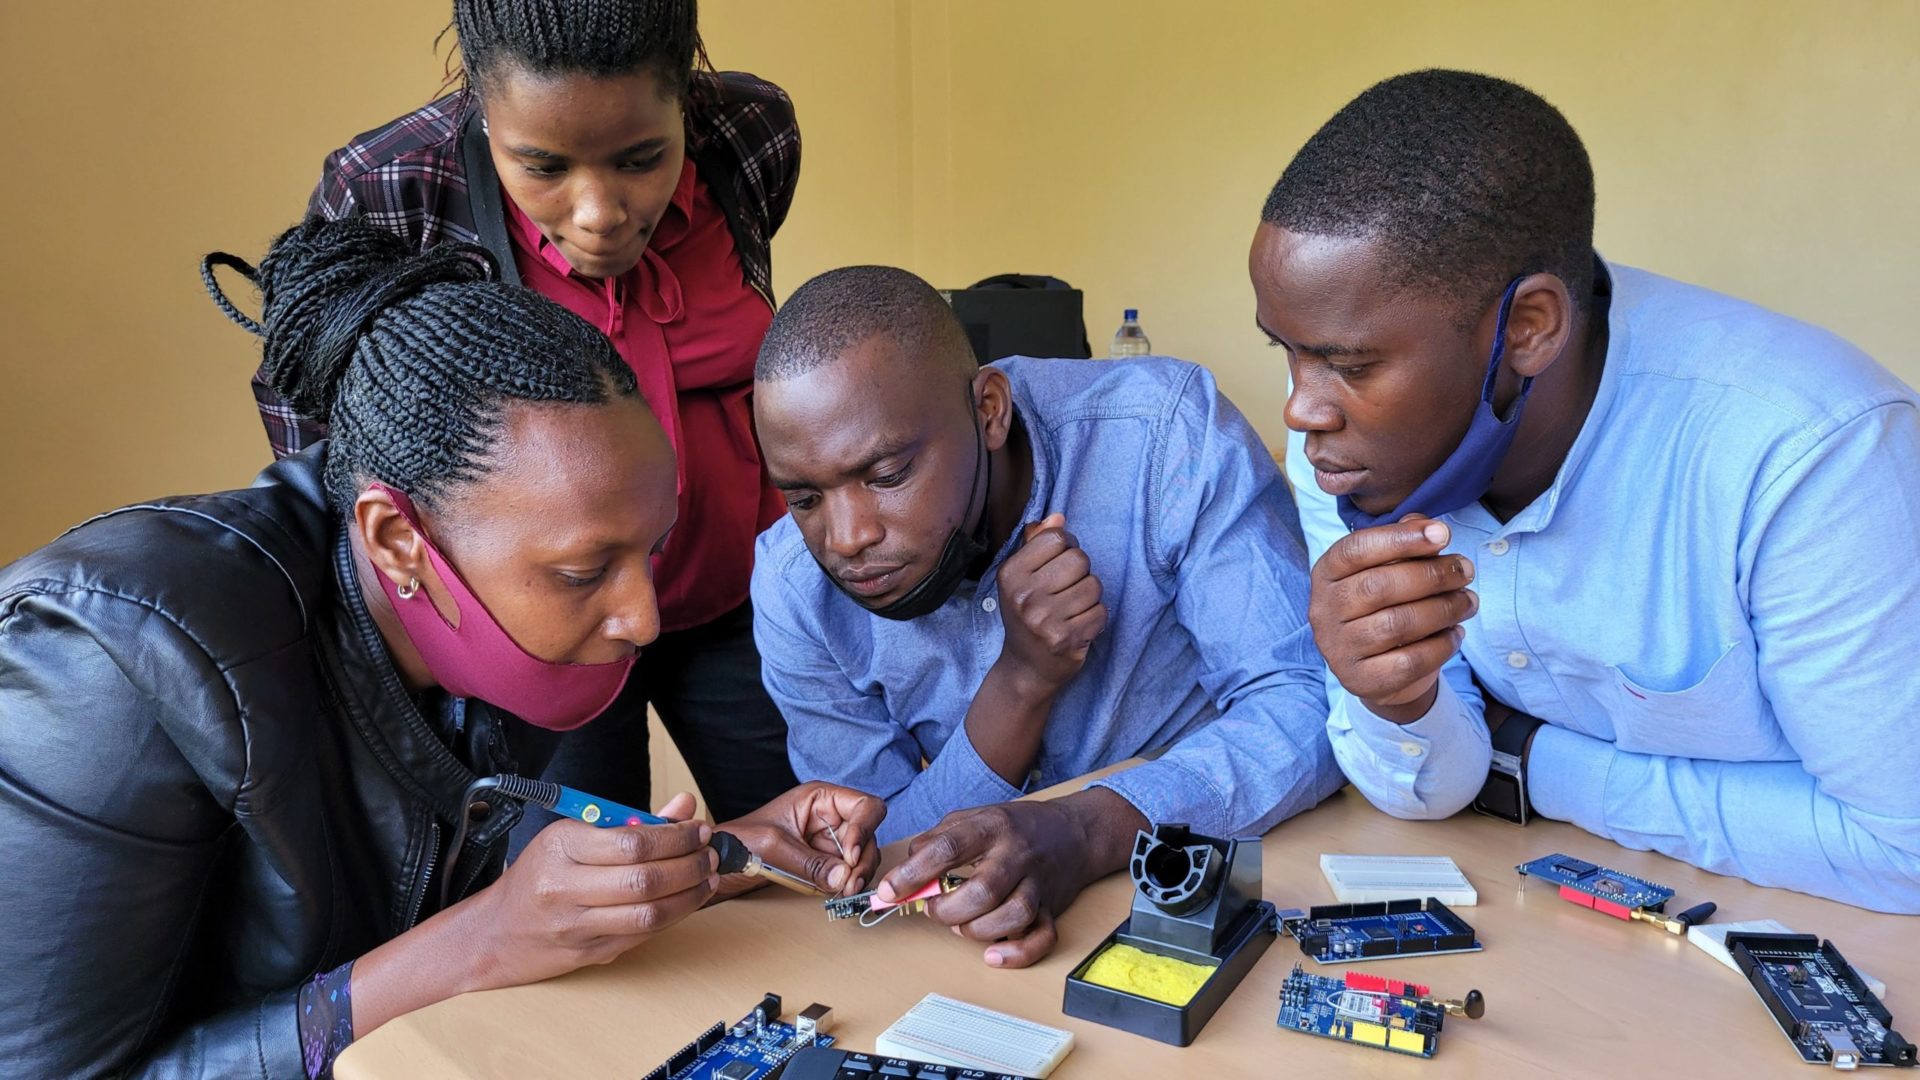 University of Rwanda scientists investigate how digital tools could help families monitor indoor air pollution